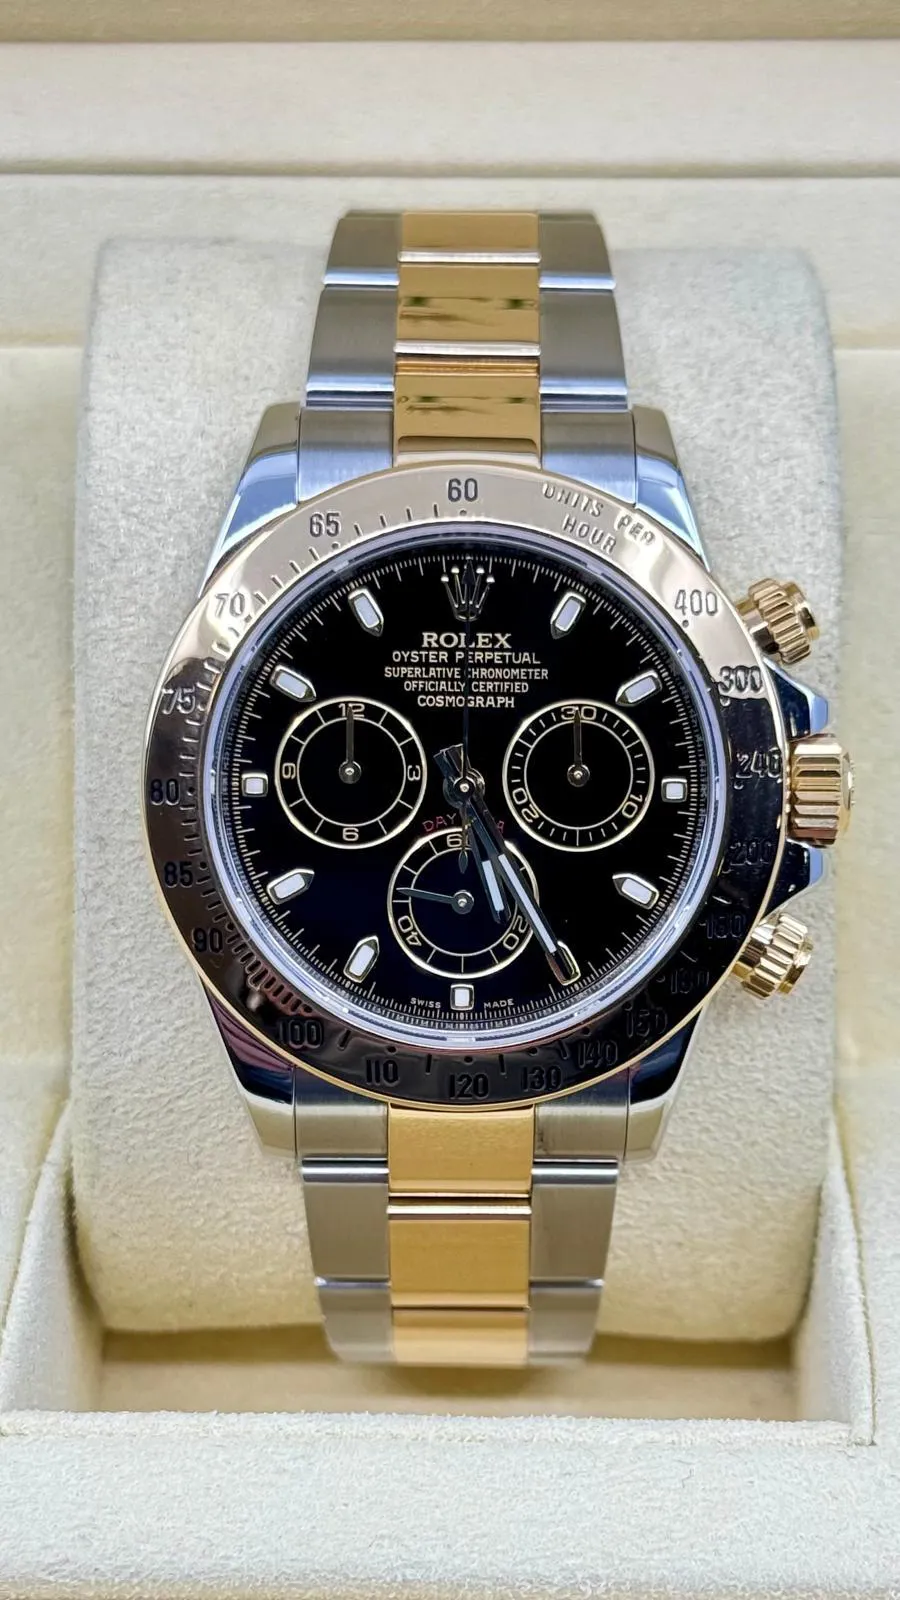 Rolex Daytona 116523 40mm Stainless steel and yellow gold